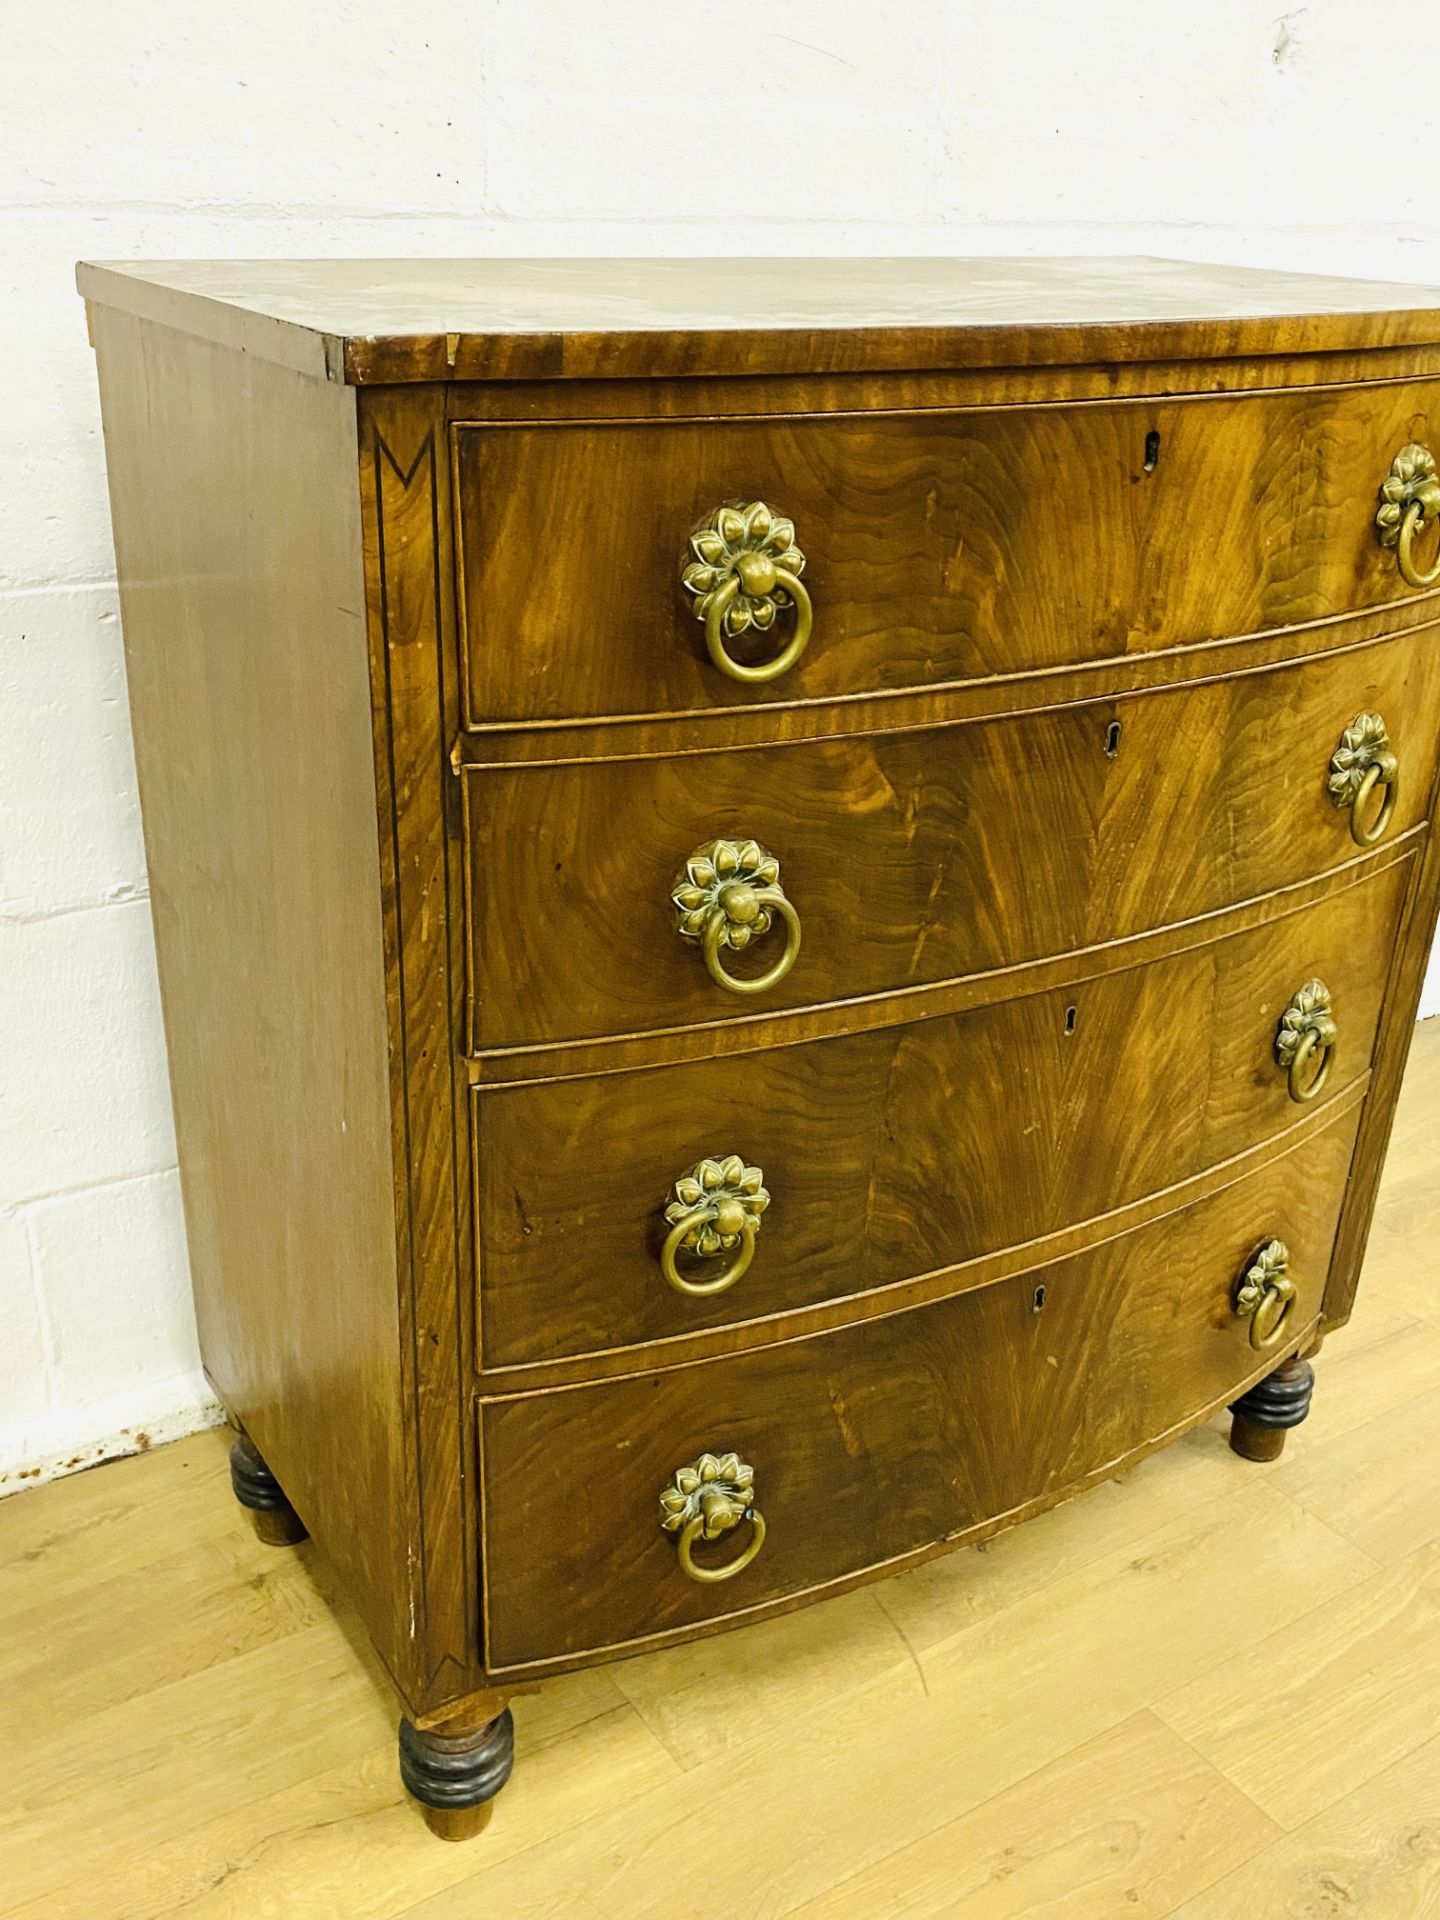 Bow fronted chest of drawers - Image 5 of 7